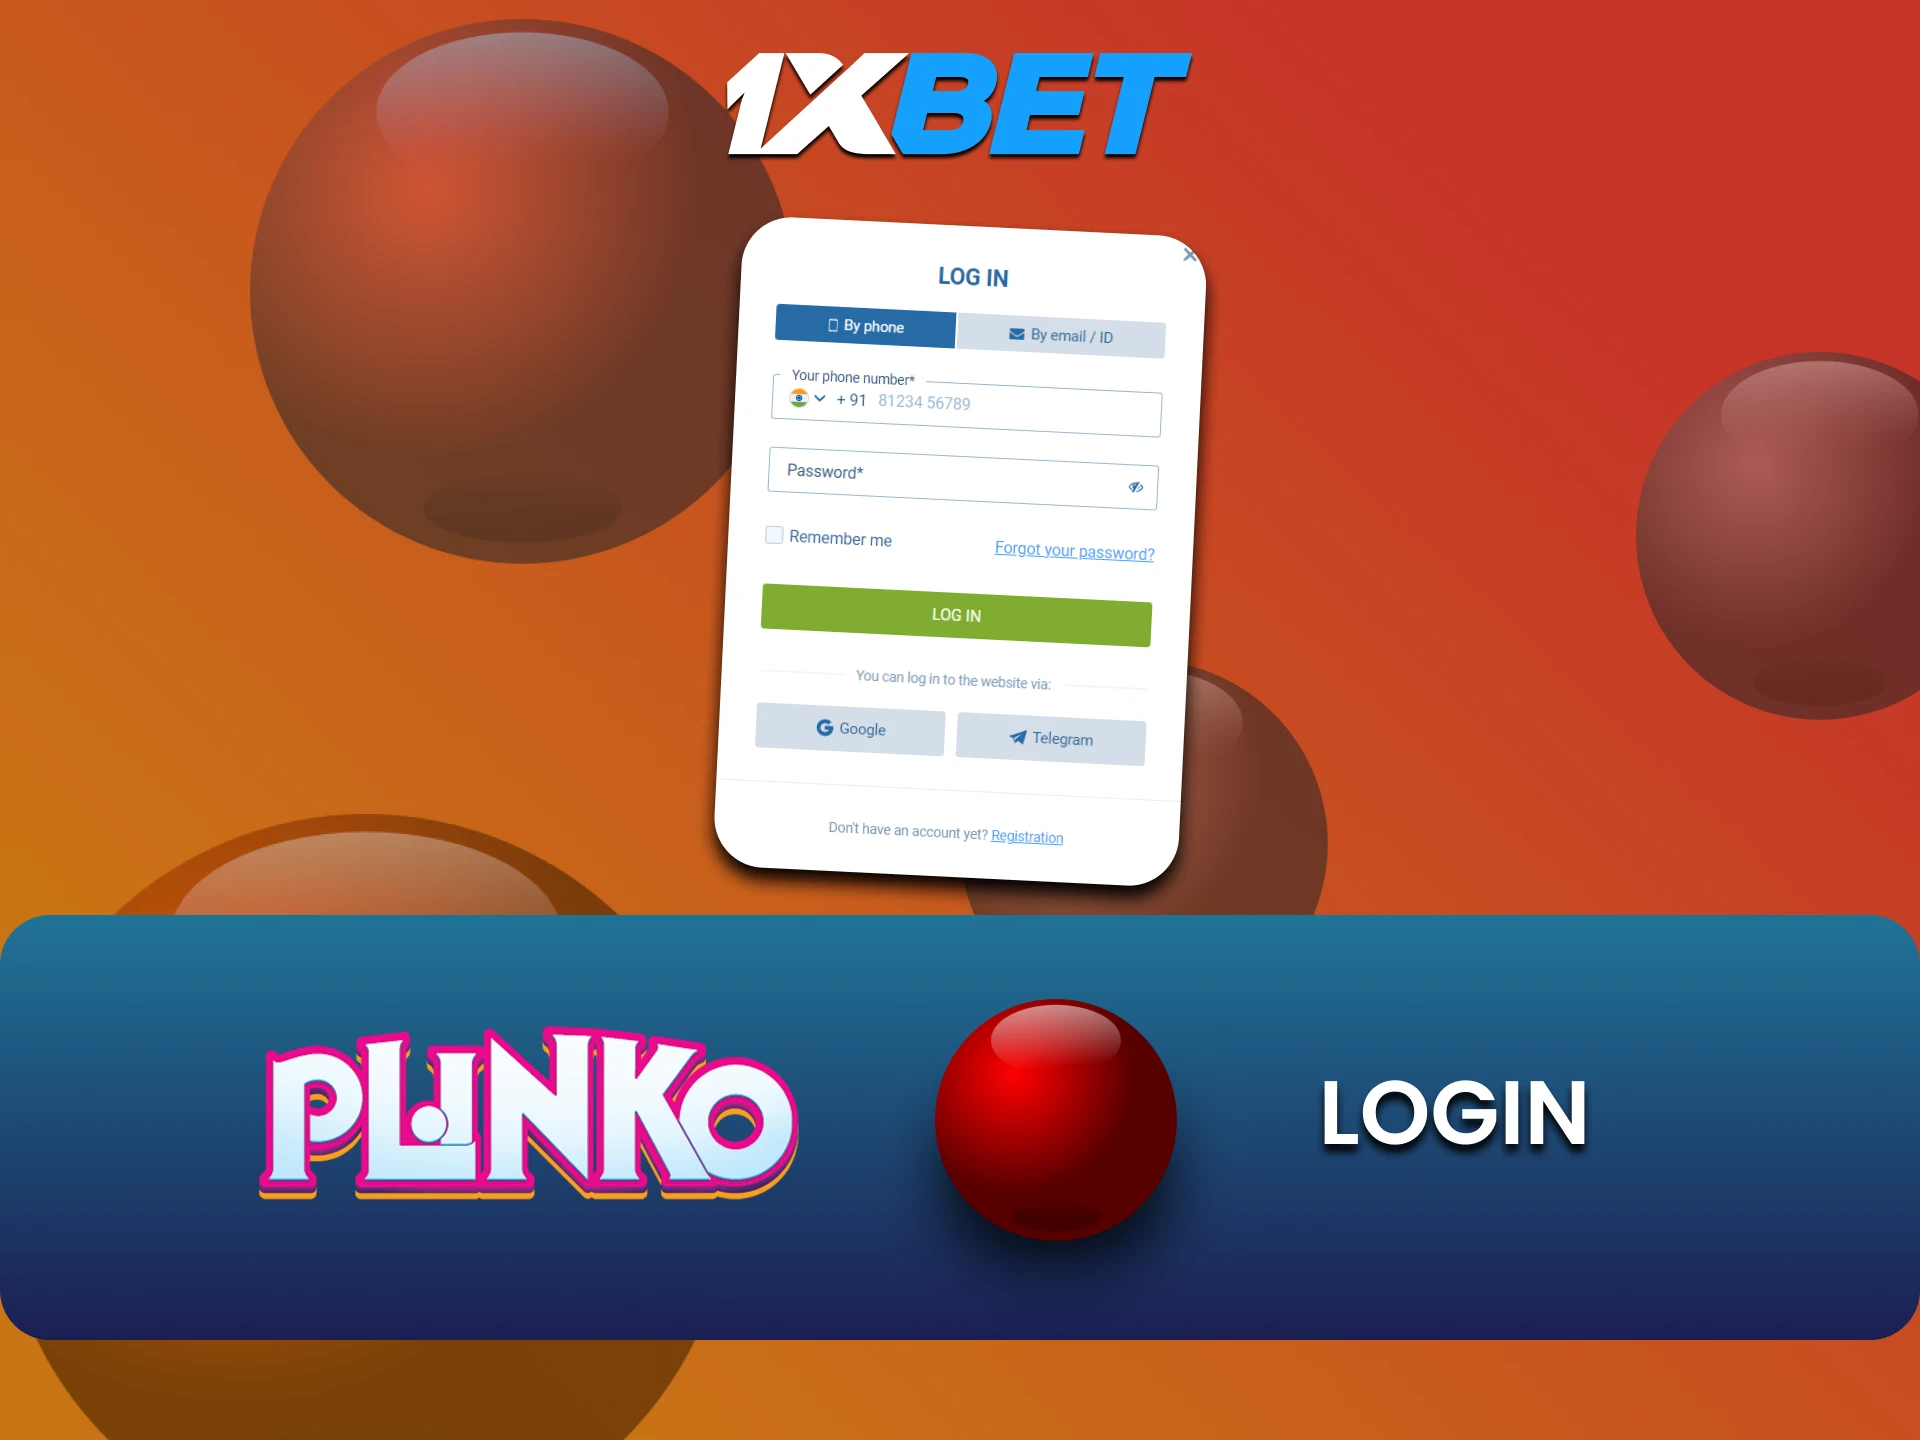 Log in to your 1xbet account to play Plinko.